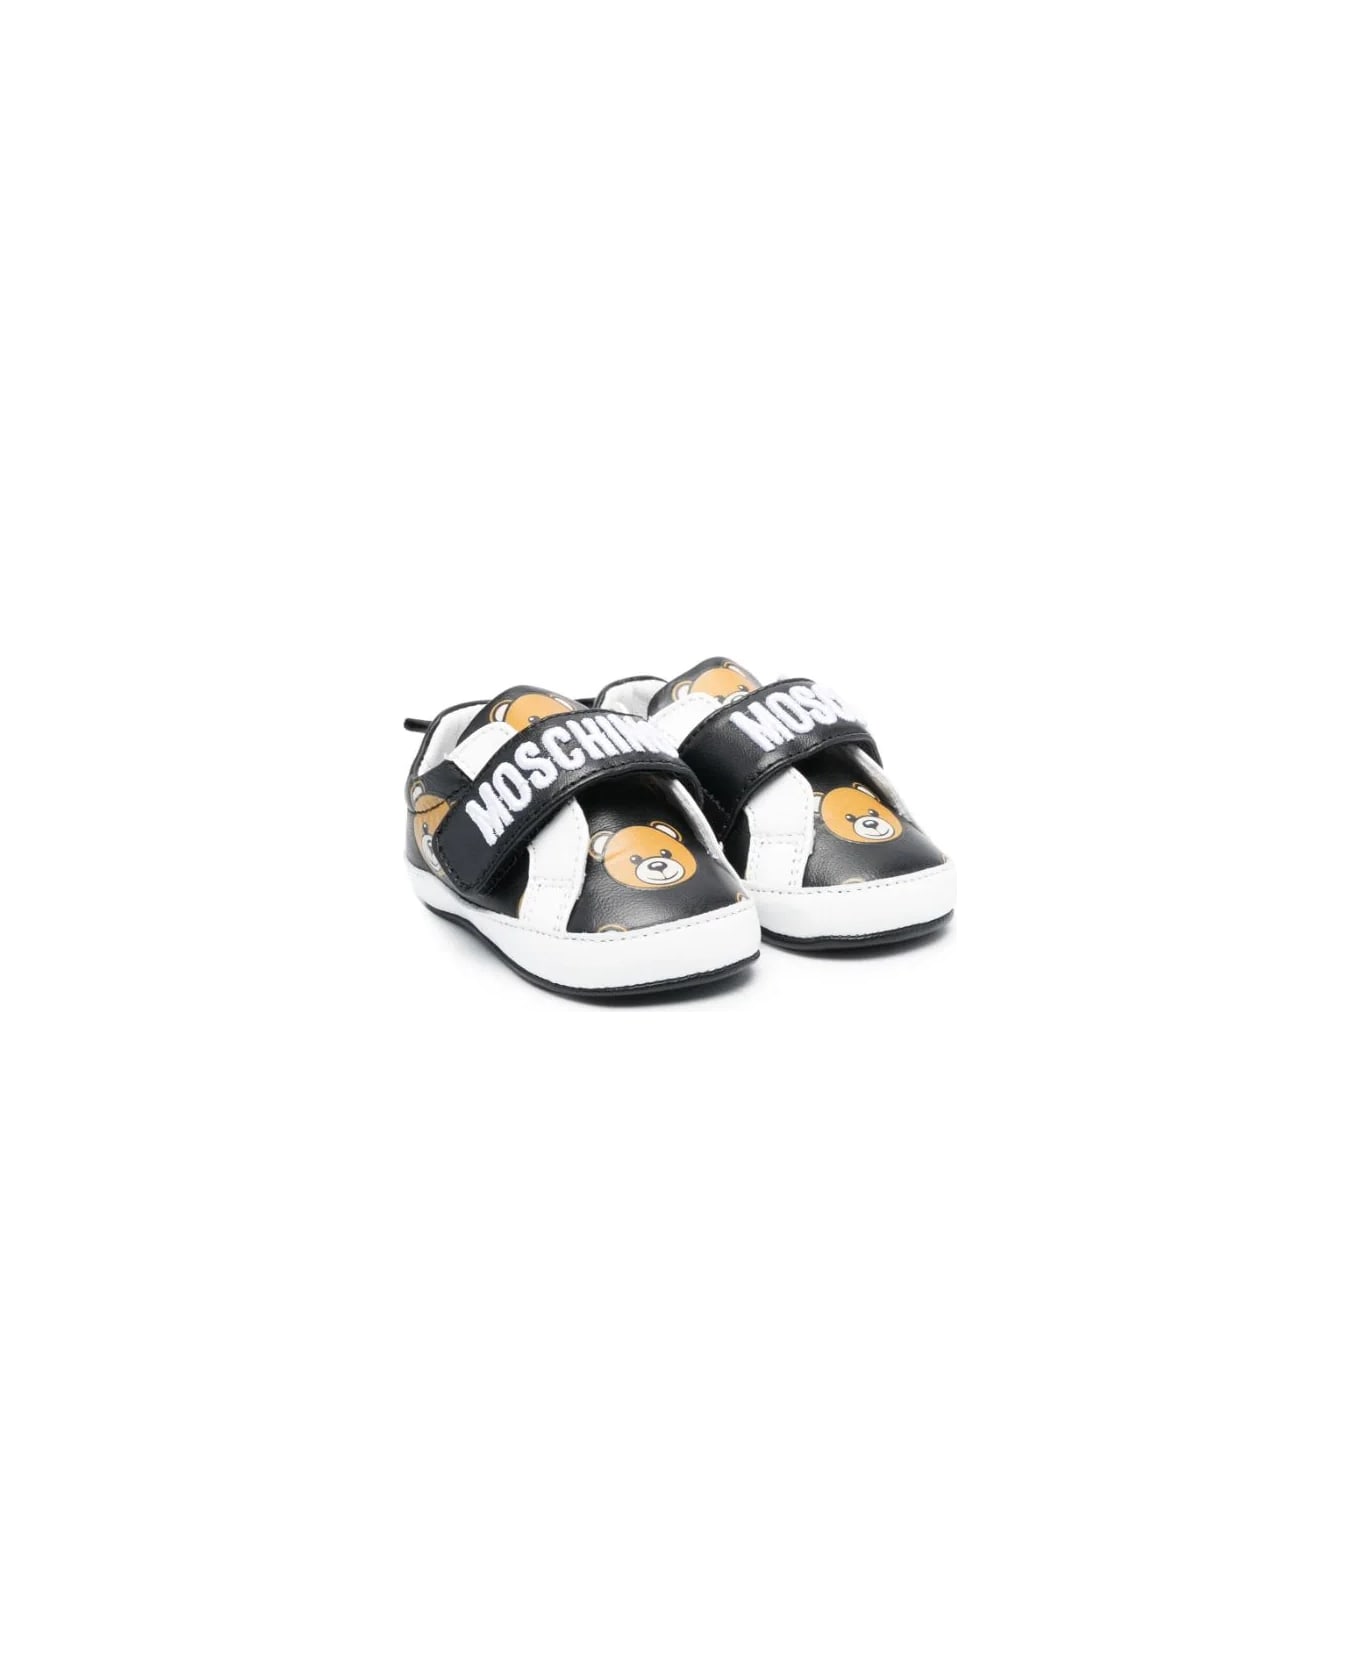 Moschino Teddy Bear Sneakers With Print - Black シューズ